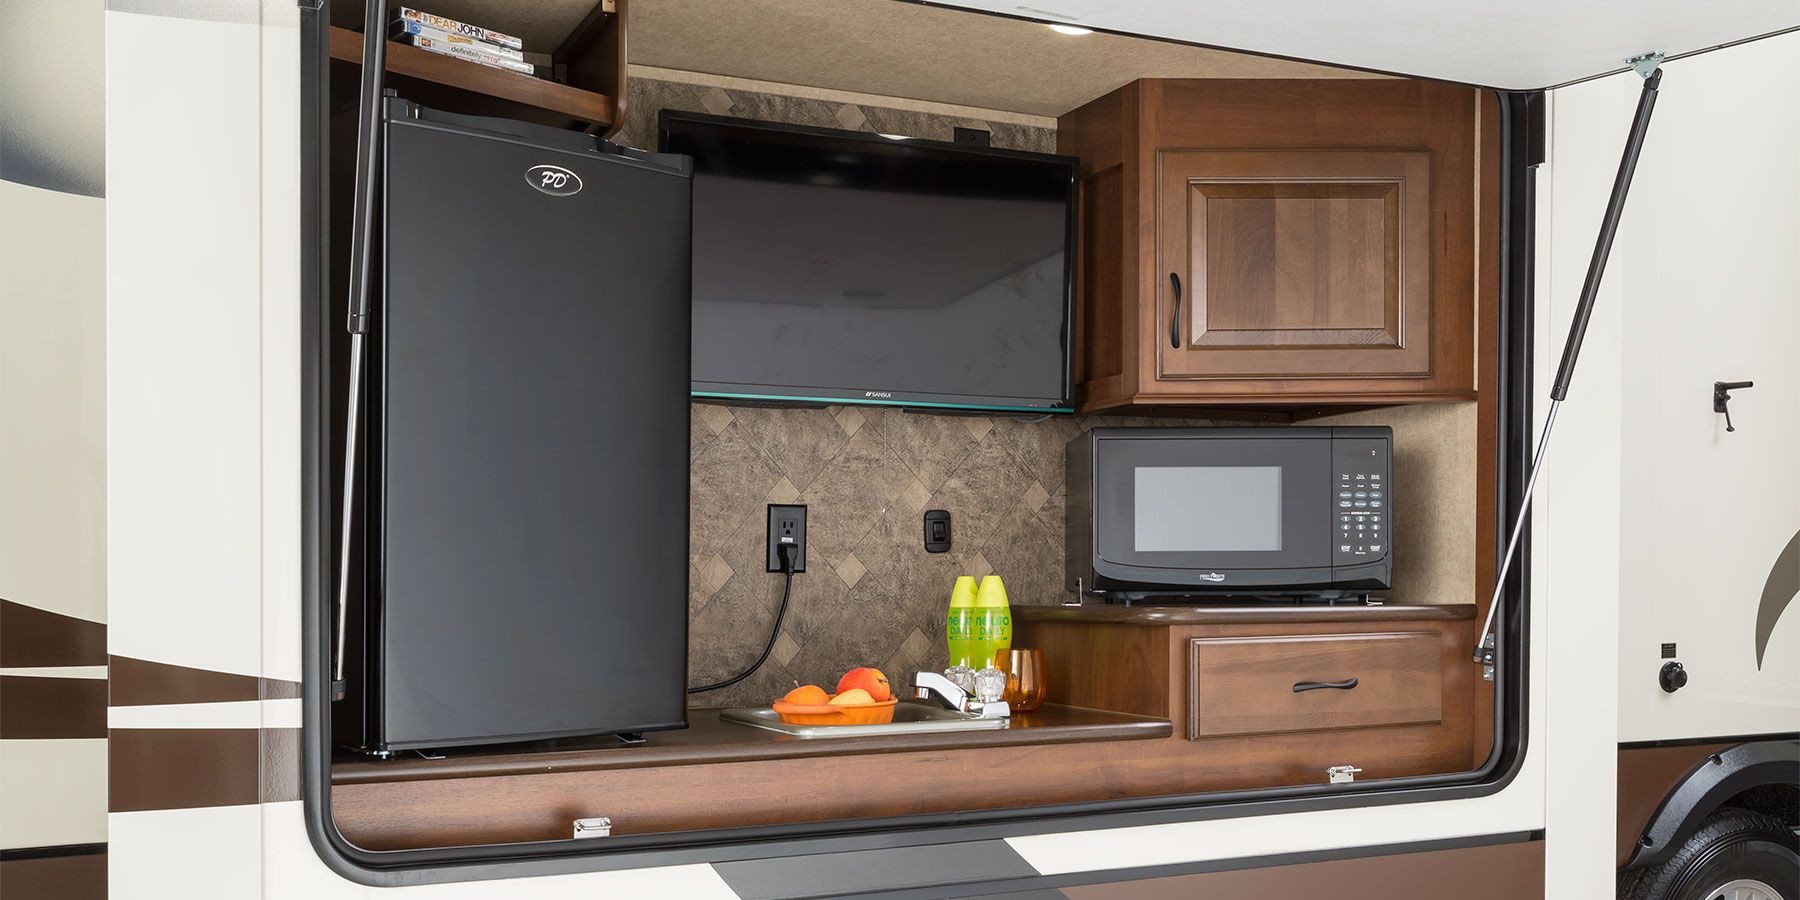 Fifth Wheel With Outdoor Kitchen
 Fifth Wheel Trailers With Bunks And Outside Kitchen – Wow Blog